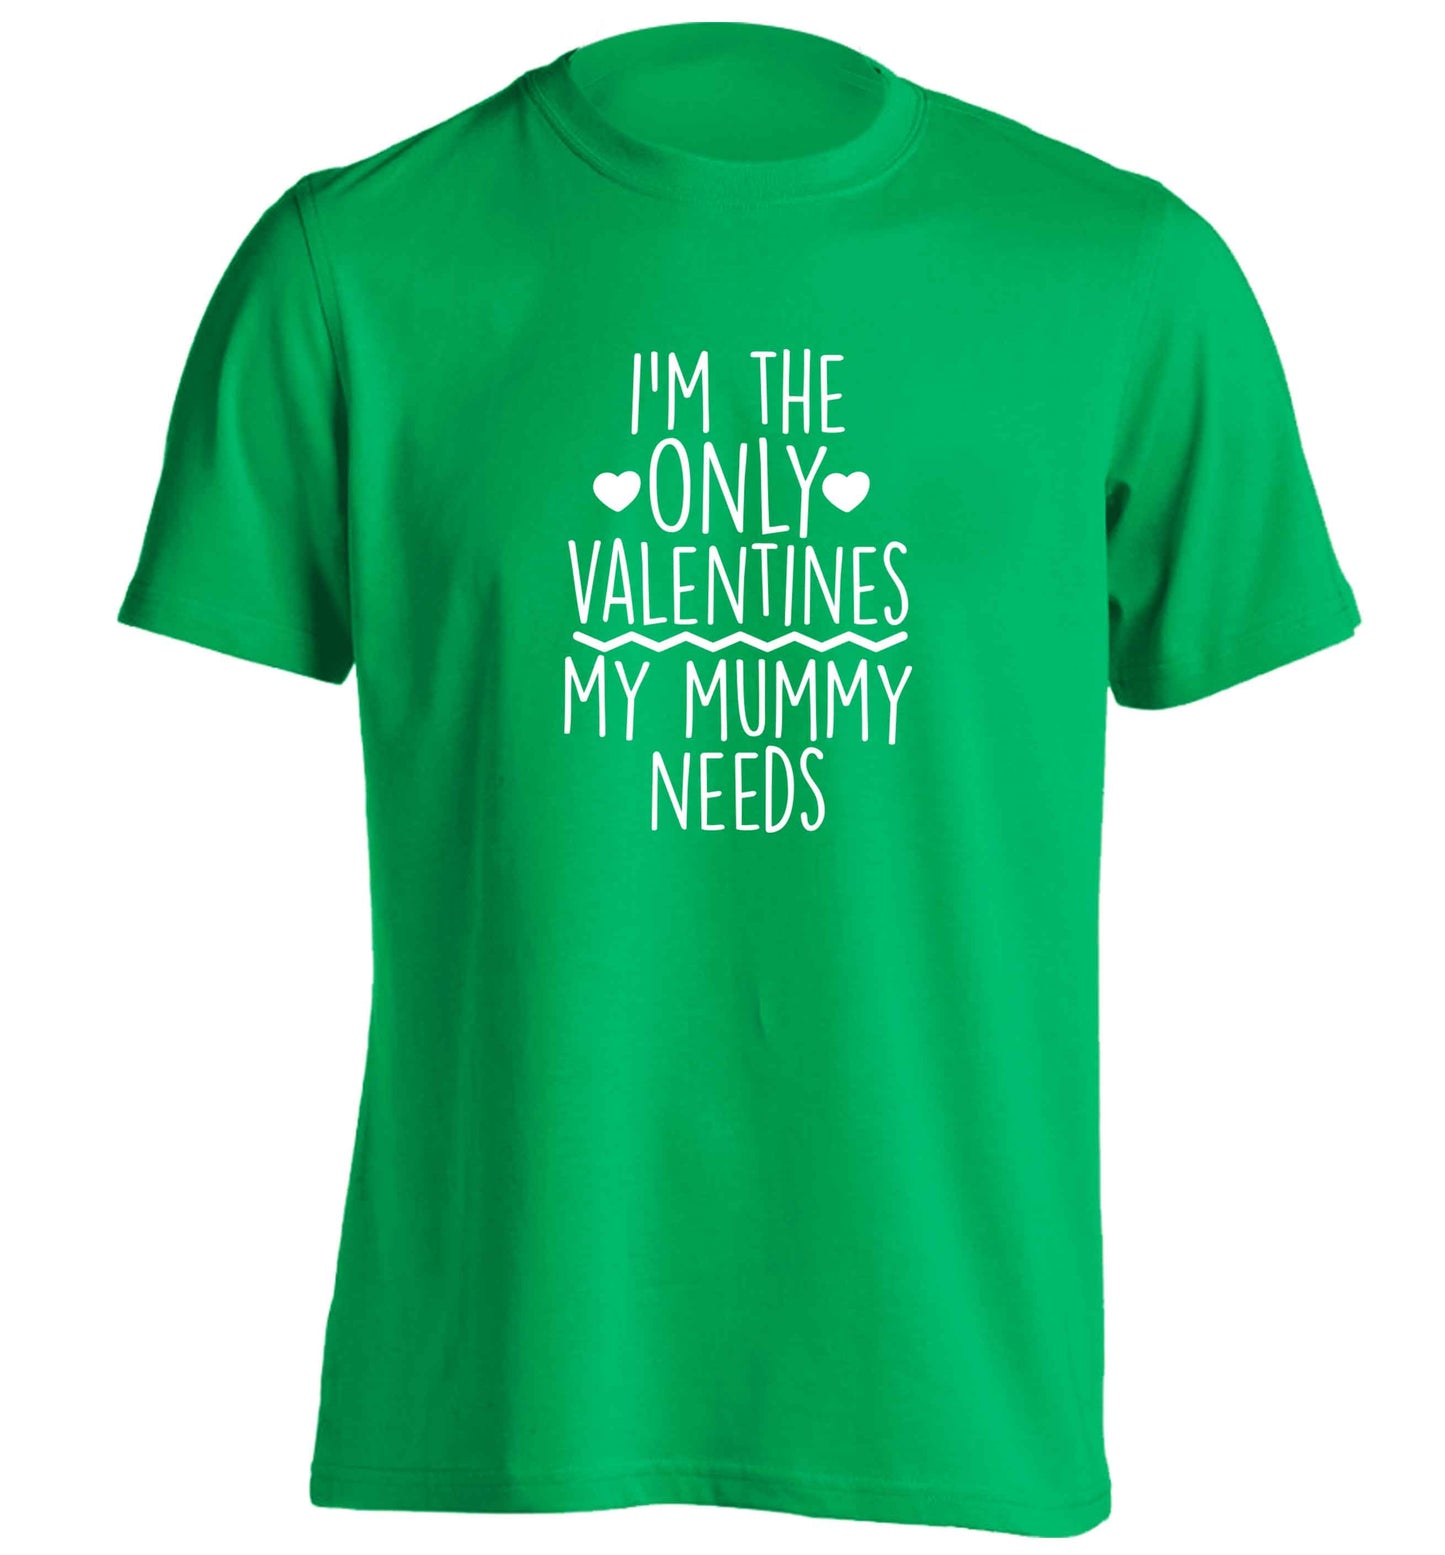 I'm the only valentines my mummy needs adults unisex green Tshirt 2XL